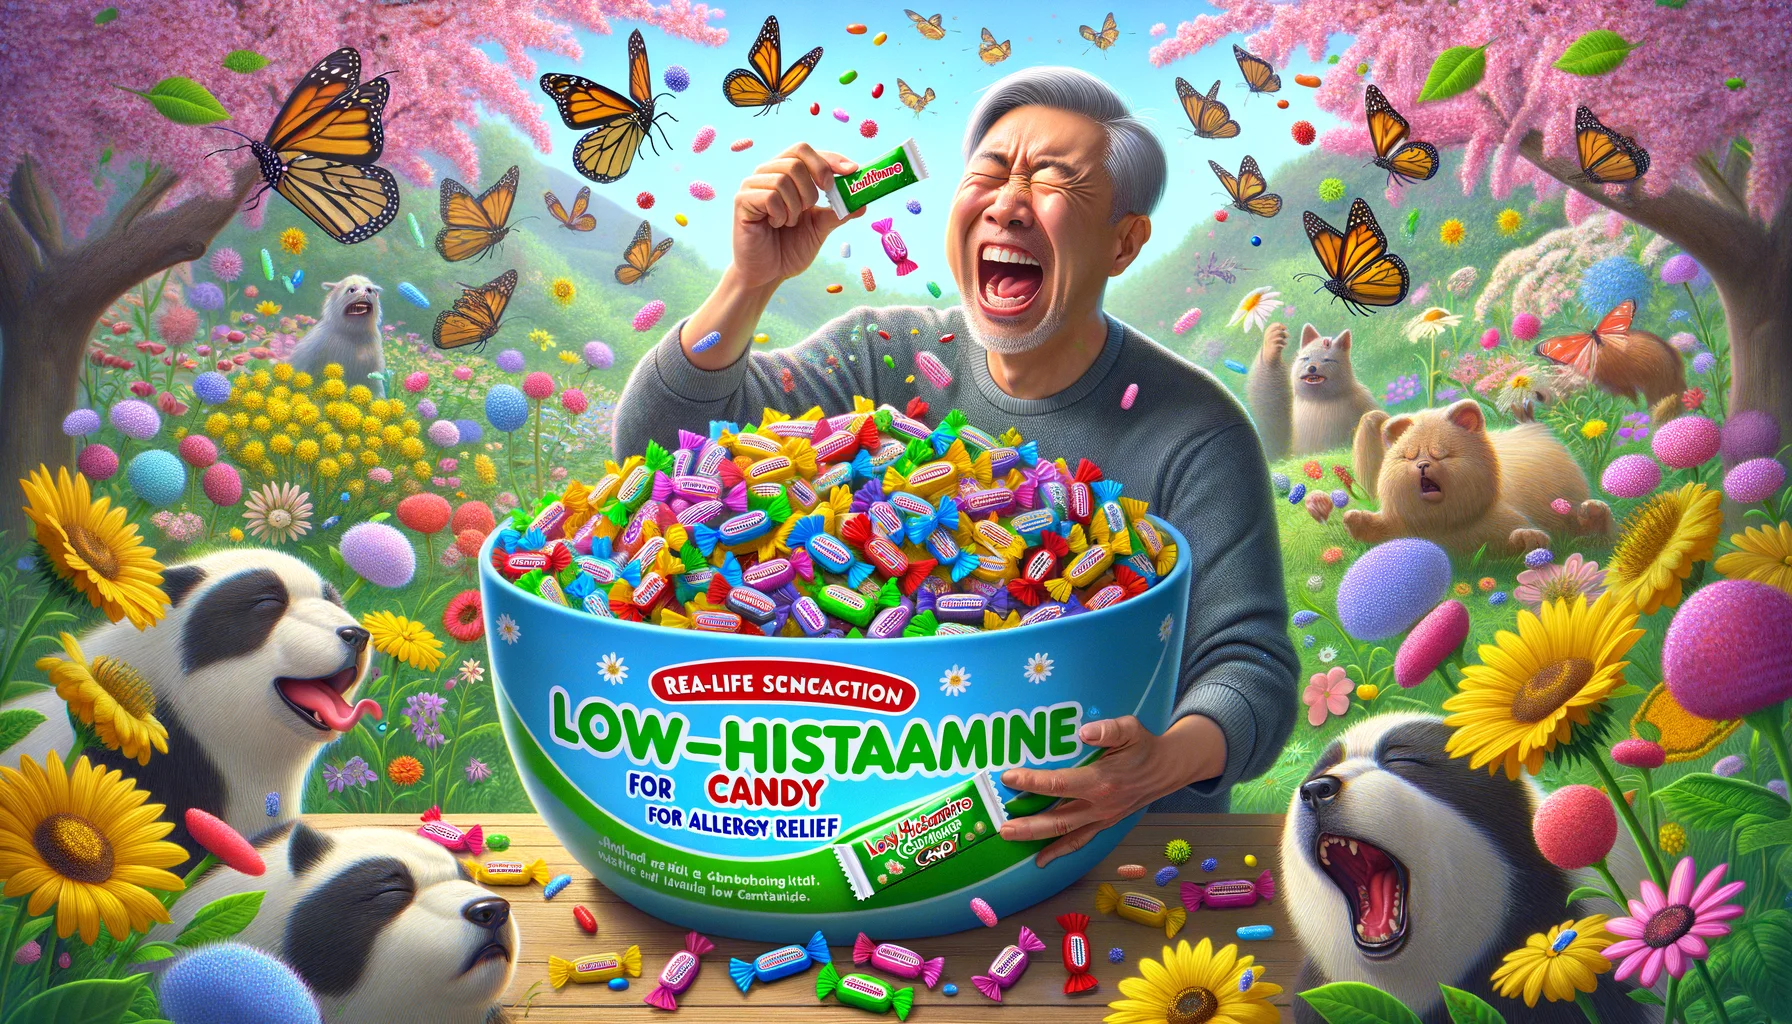 Portray a humorous, real-life scenario featuring low-histamine candies for allergy relief. The scene includes a large candy bowl filled with vibrant, colorful low-histamine candies placed amidst a blooming spring garden overflowing with flowers, butterflies, and bees. Despite the pollen-filled environment, a middle-aged, Asian man with a huge smile and a joyful expression on his face is holding one of these candies. The man is surrounded by an invisible shield, indicating his allergy protection, with sneezing birds and animals around him. On the foreground, words in playful font state 'Low-Histamine Candy for Allergy Relief'.